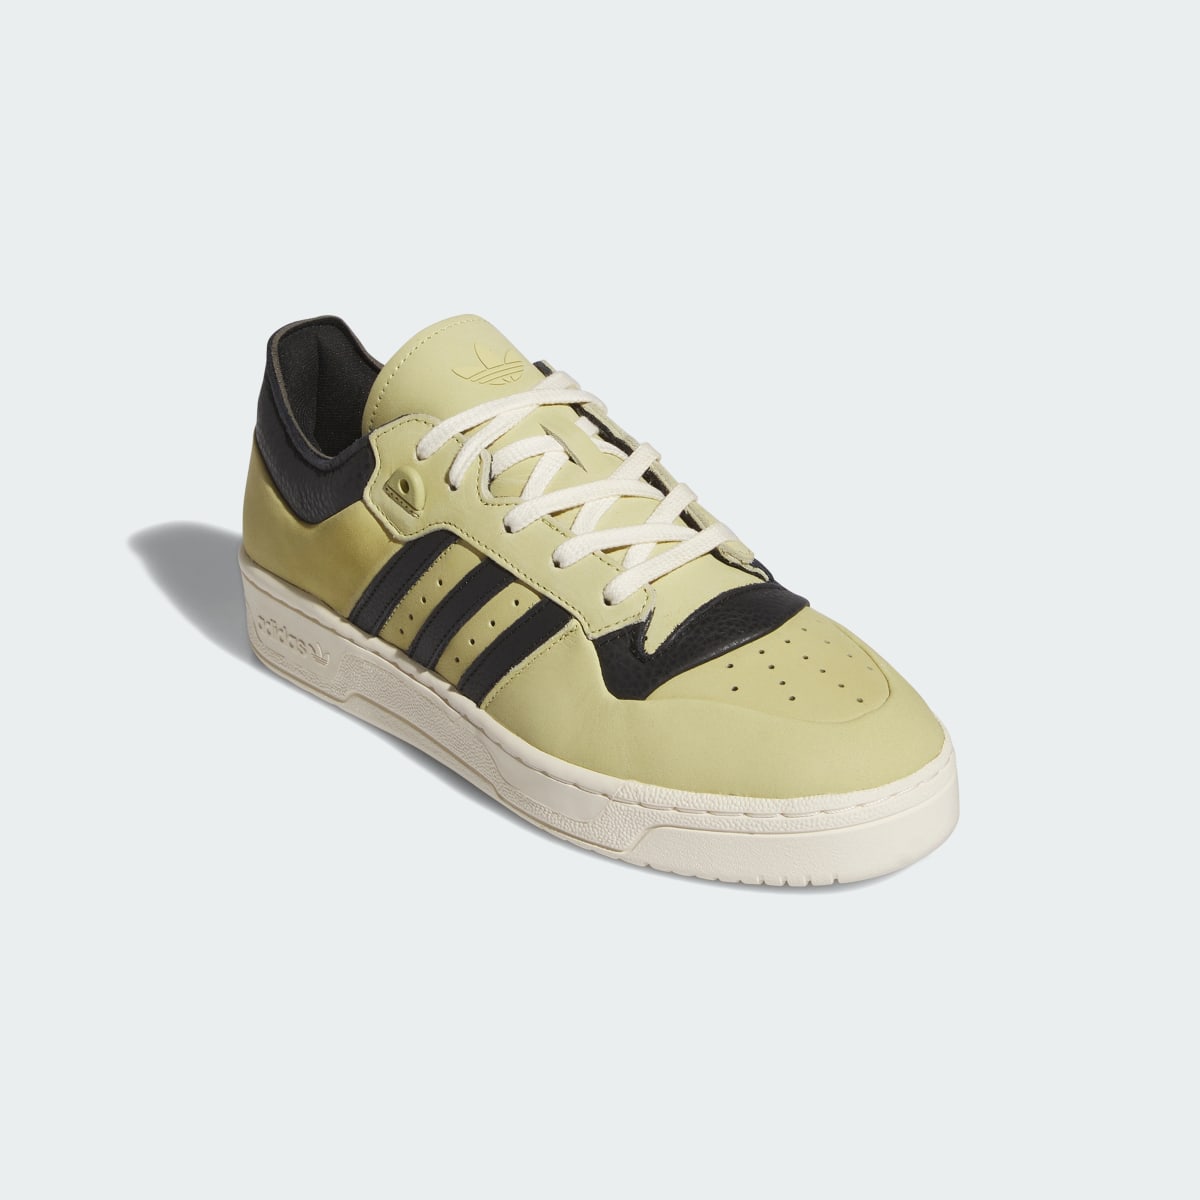 Adidas Rivalry 86 Low 001 Shoes. 5